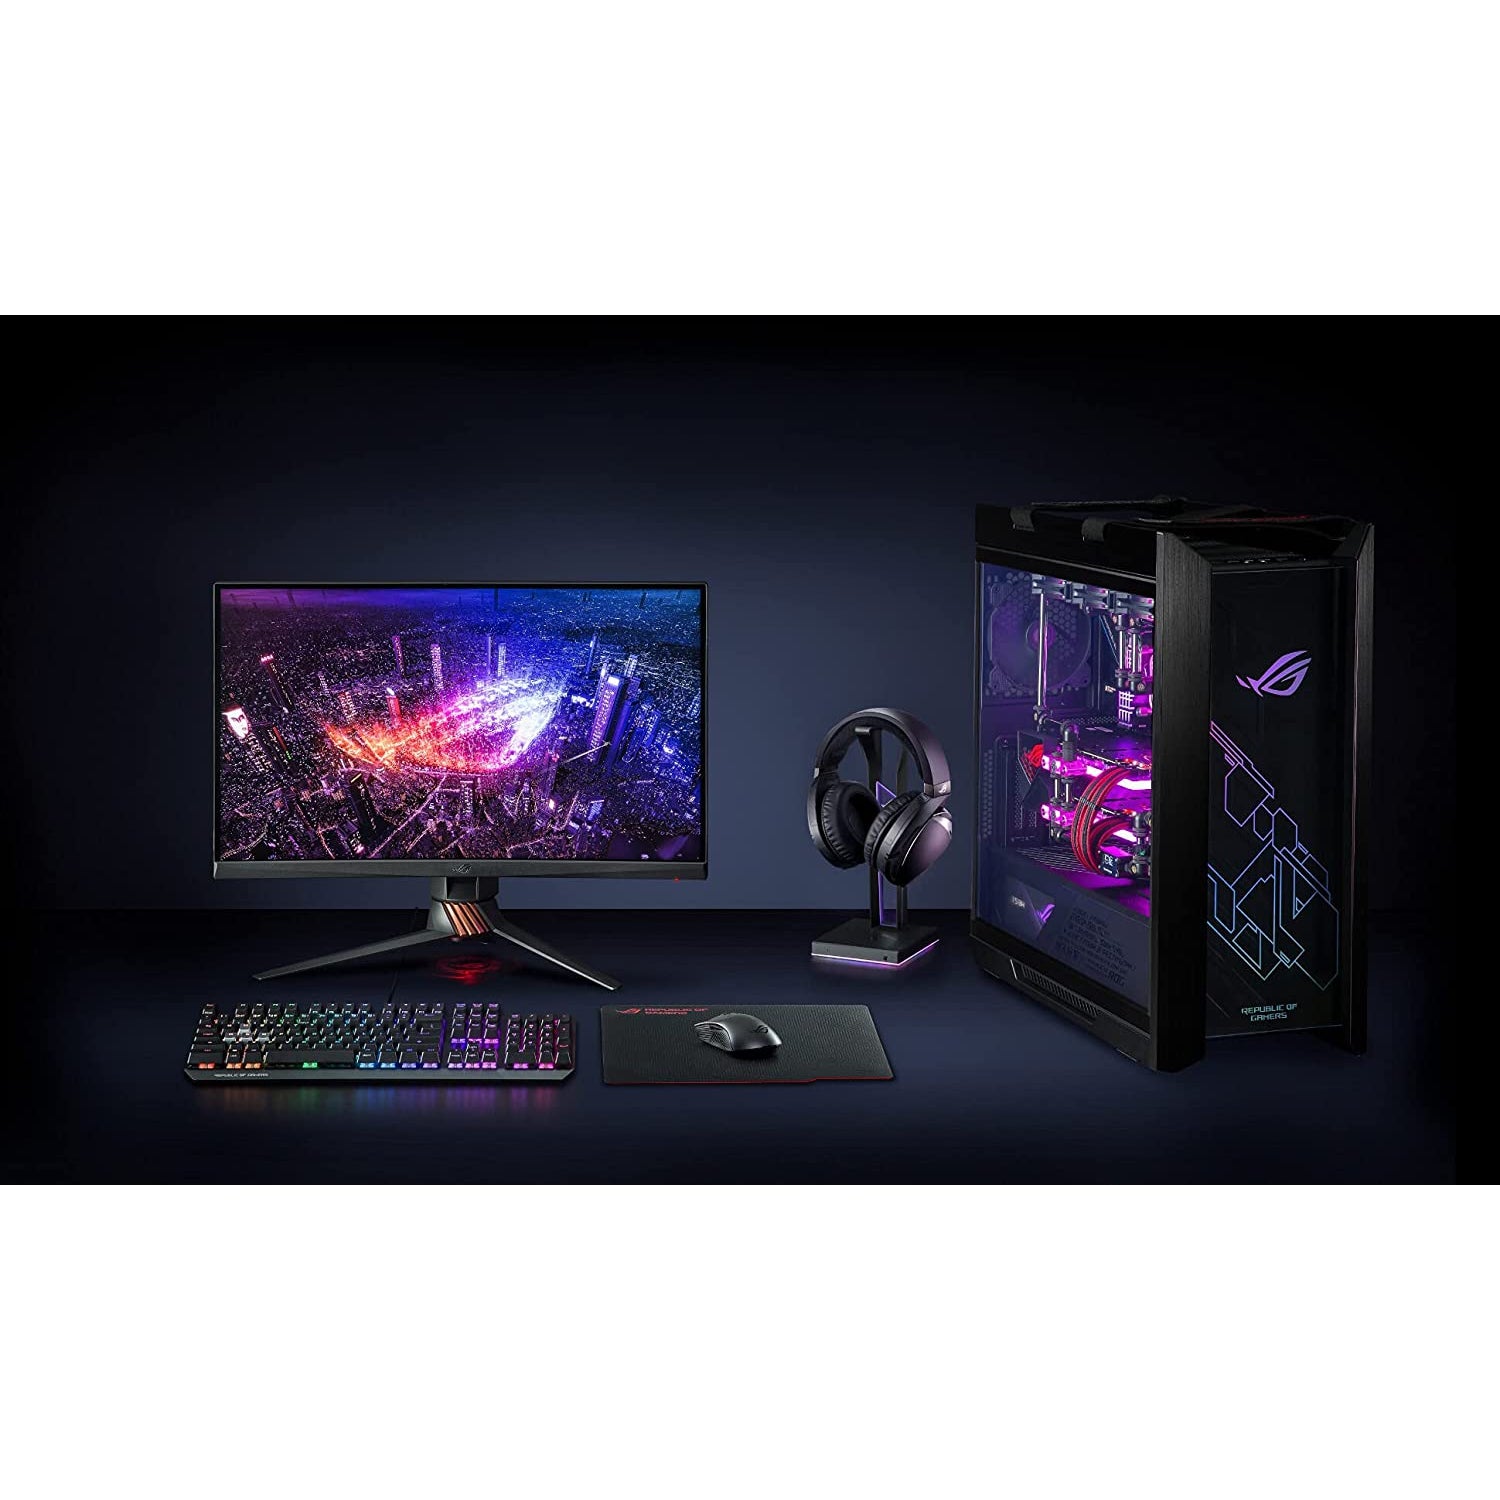 ASUS ROG Throne Qi with Wireless Charging, Dual USB 3.1 Ports and Aura Sync, Black